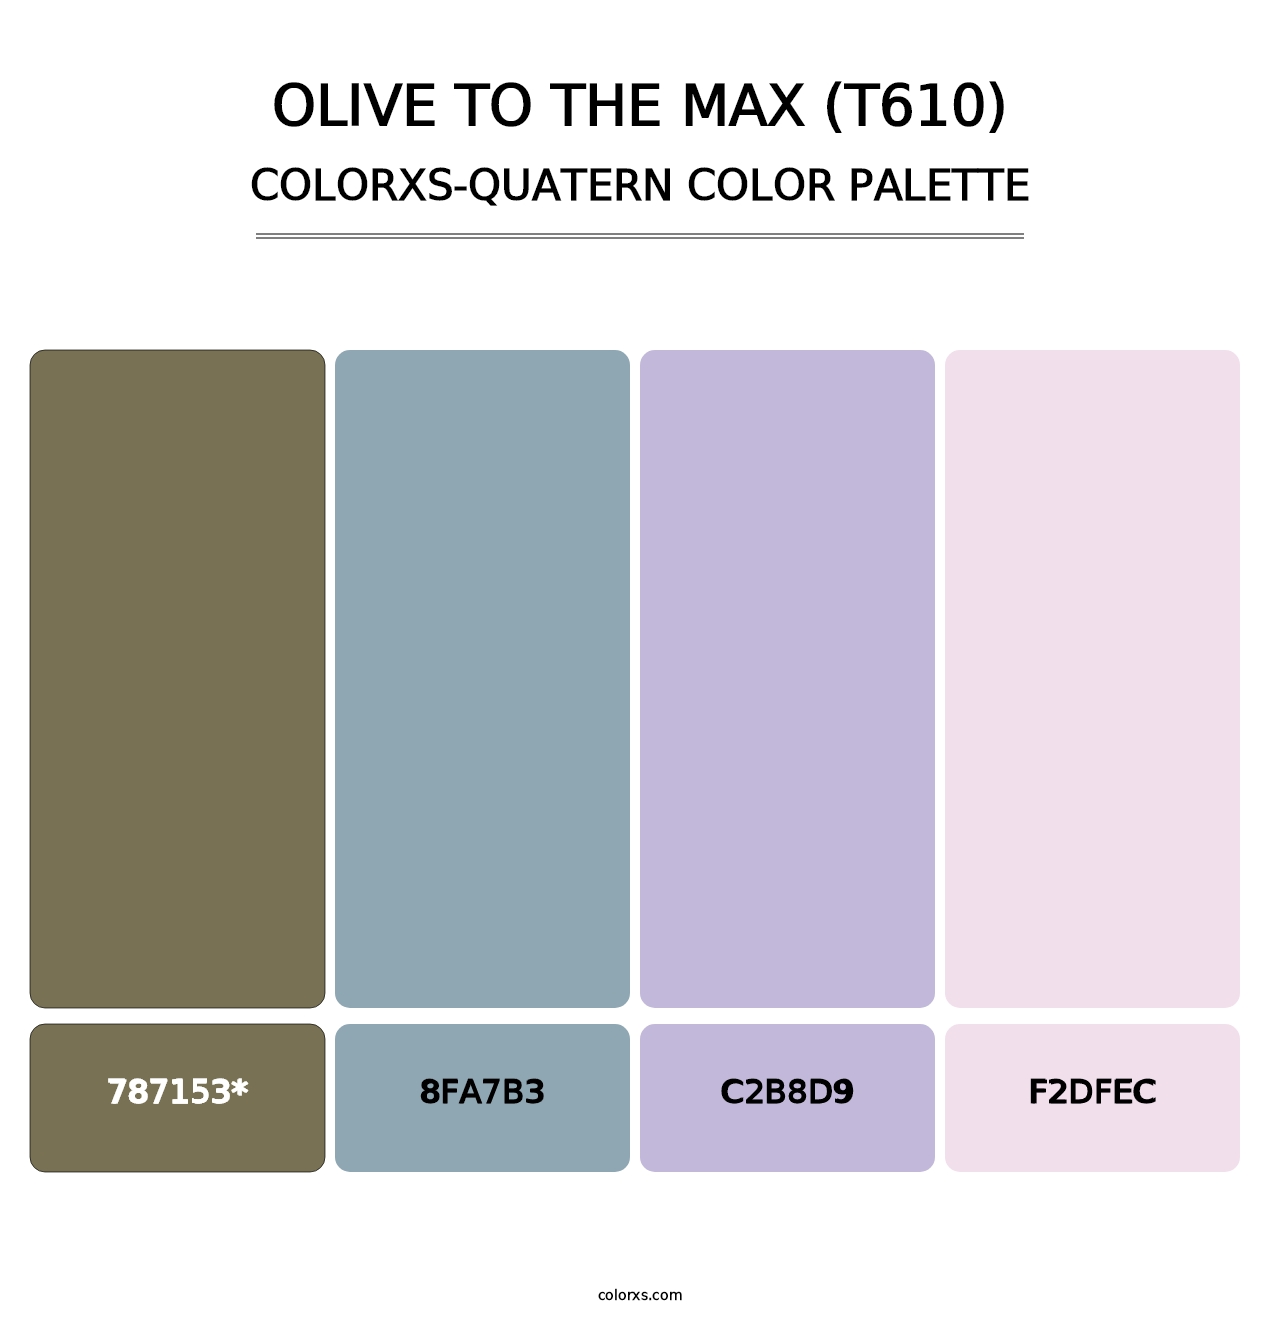 Olive to the Max (T610) - Colorxs Quatern Palette